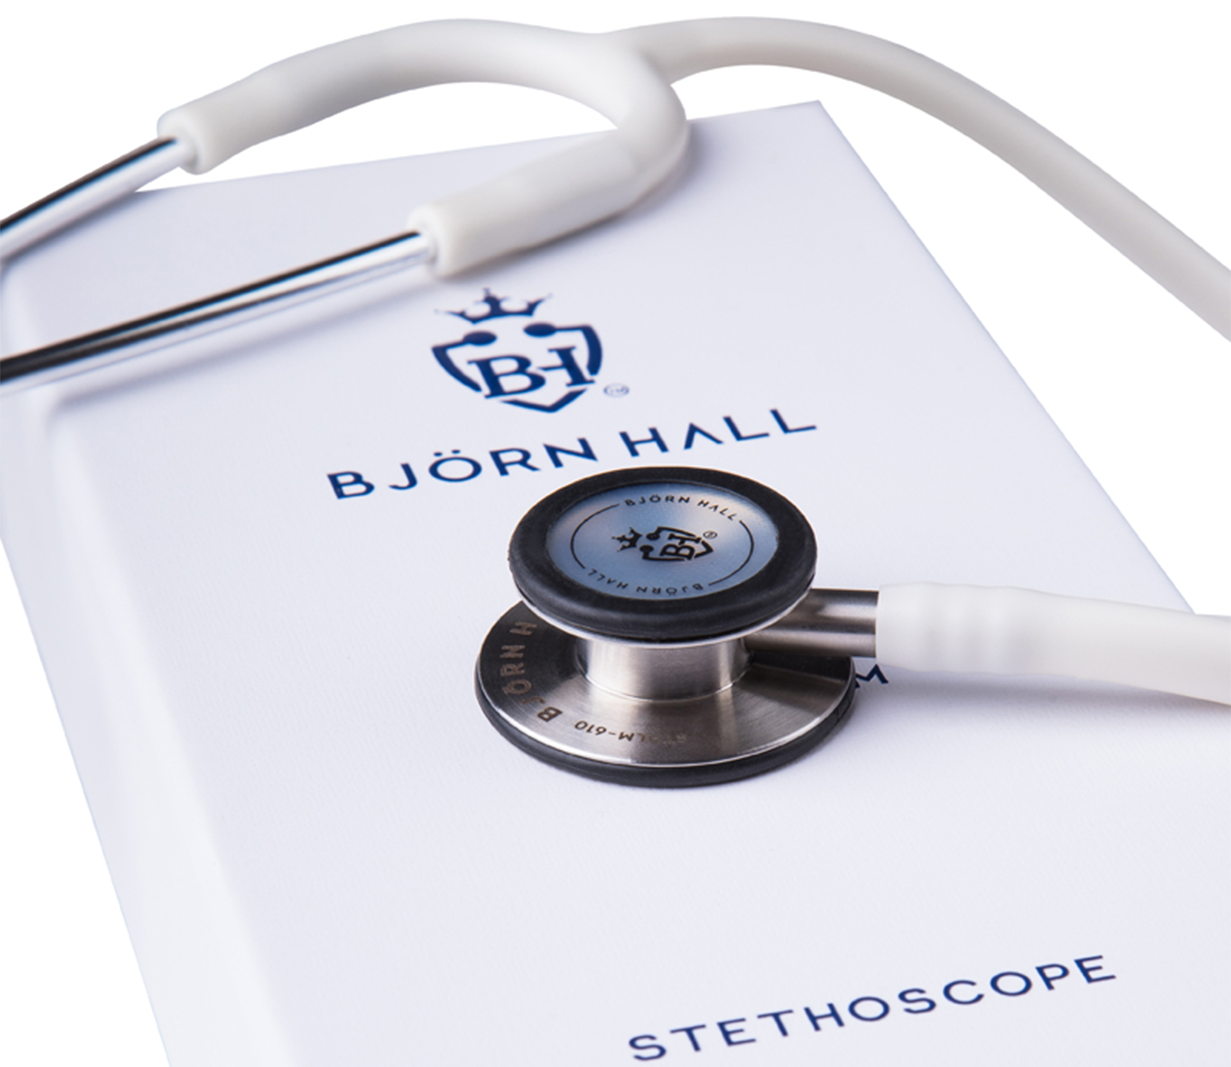 Dual Head Stethoscope With Bell And Diaphragm